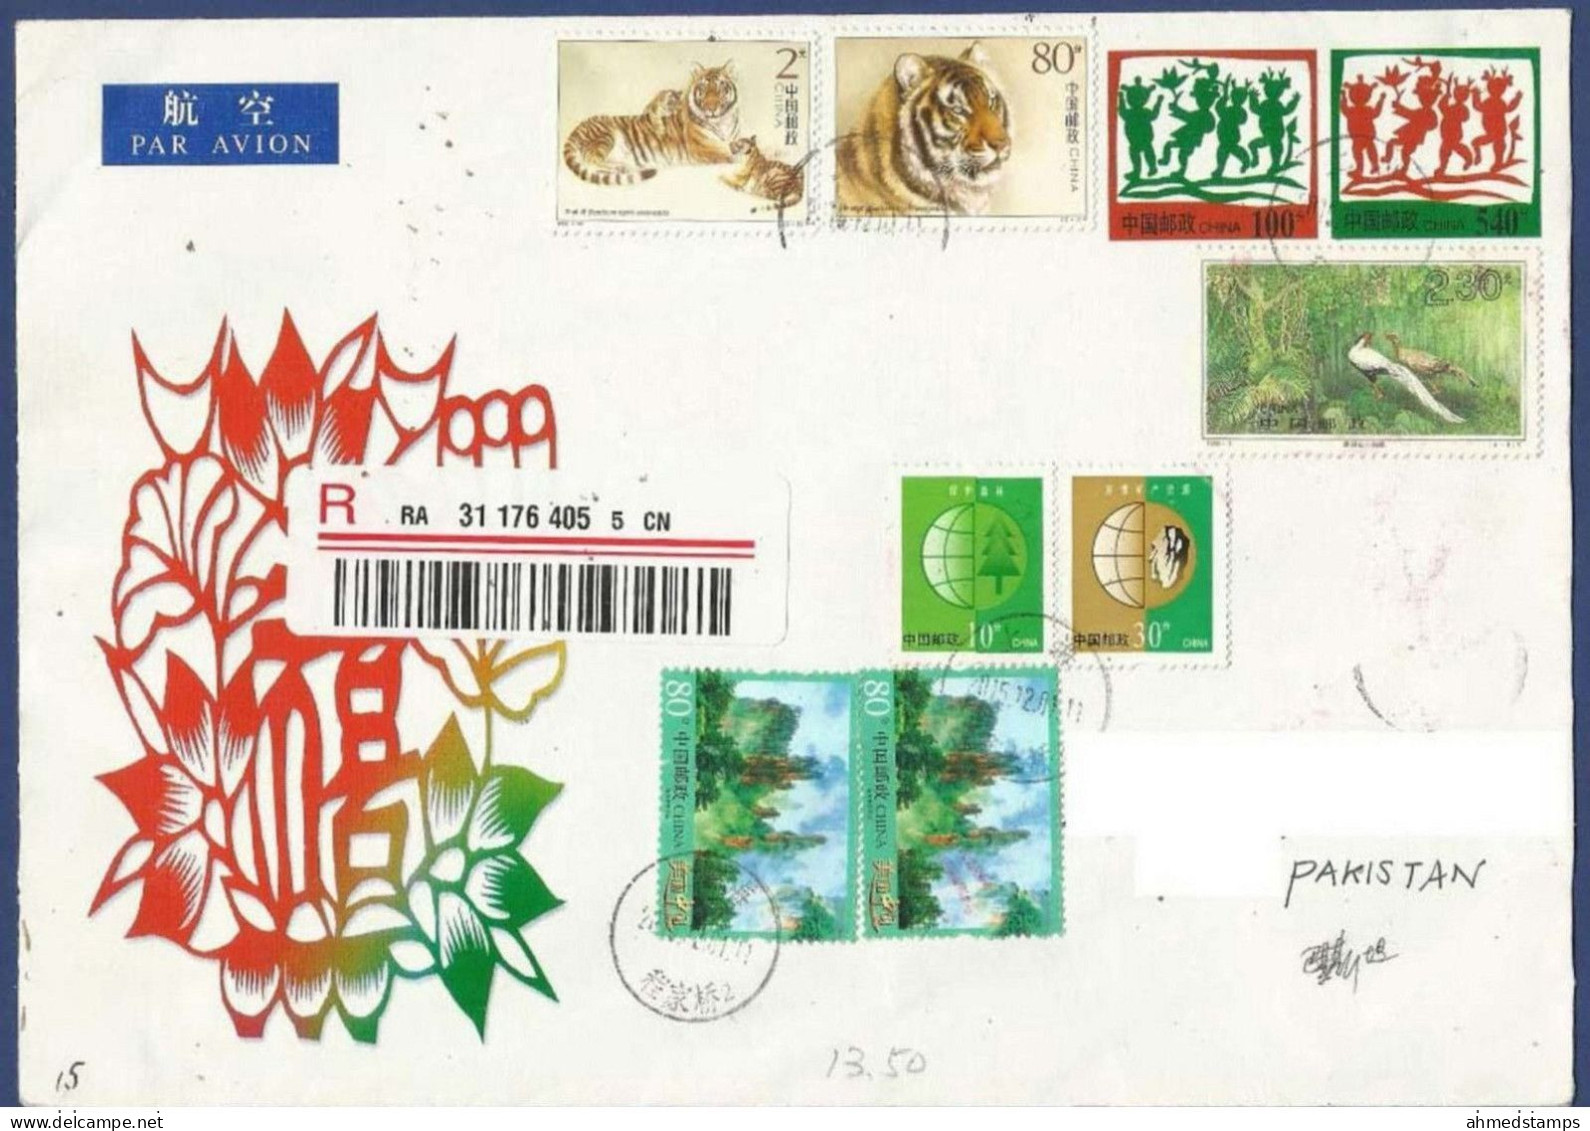 CHINA  REGISTERED POSTAL USED AIRMAIL COVER TO PAKISTAN - Luchtpost